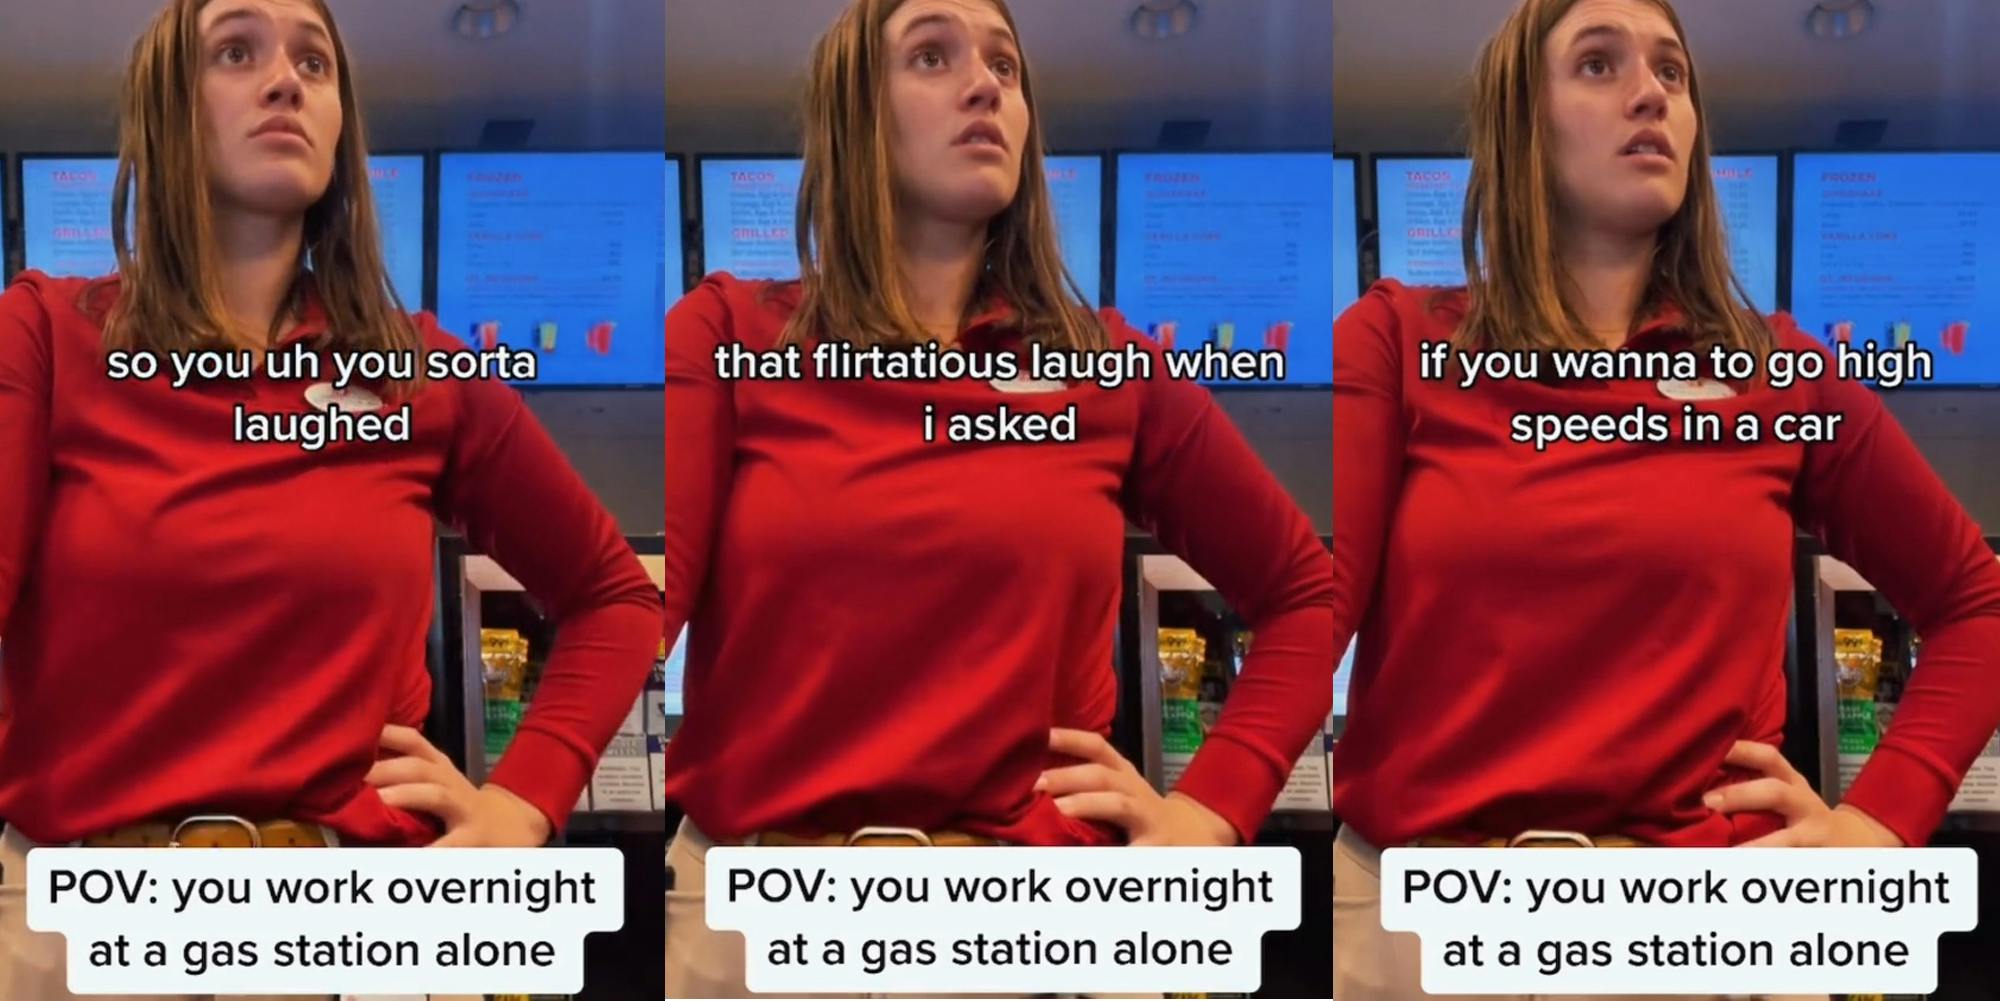 gas station employee with caption "POV: you work overnight at a gas station alone" "so you uh sorta laughed" (l) gas station employee with caption "POV: you work overnight at a gas station alone" "that flirtatious laugh when I asked" (c) gas station employee with caption "POV: you work overnight at a gas station alone" "if you wanna to go high speeds in a car" (r)